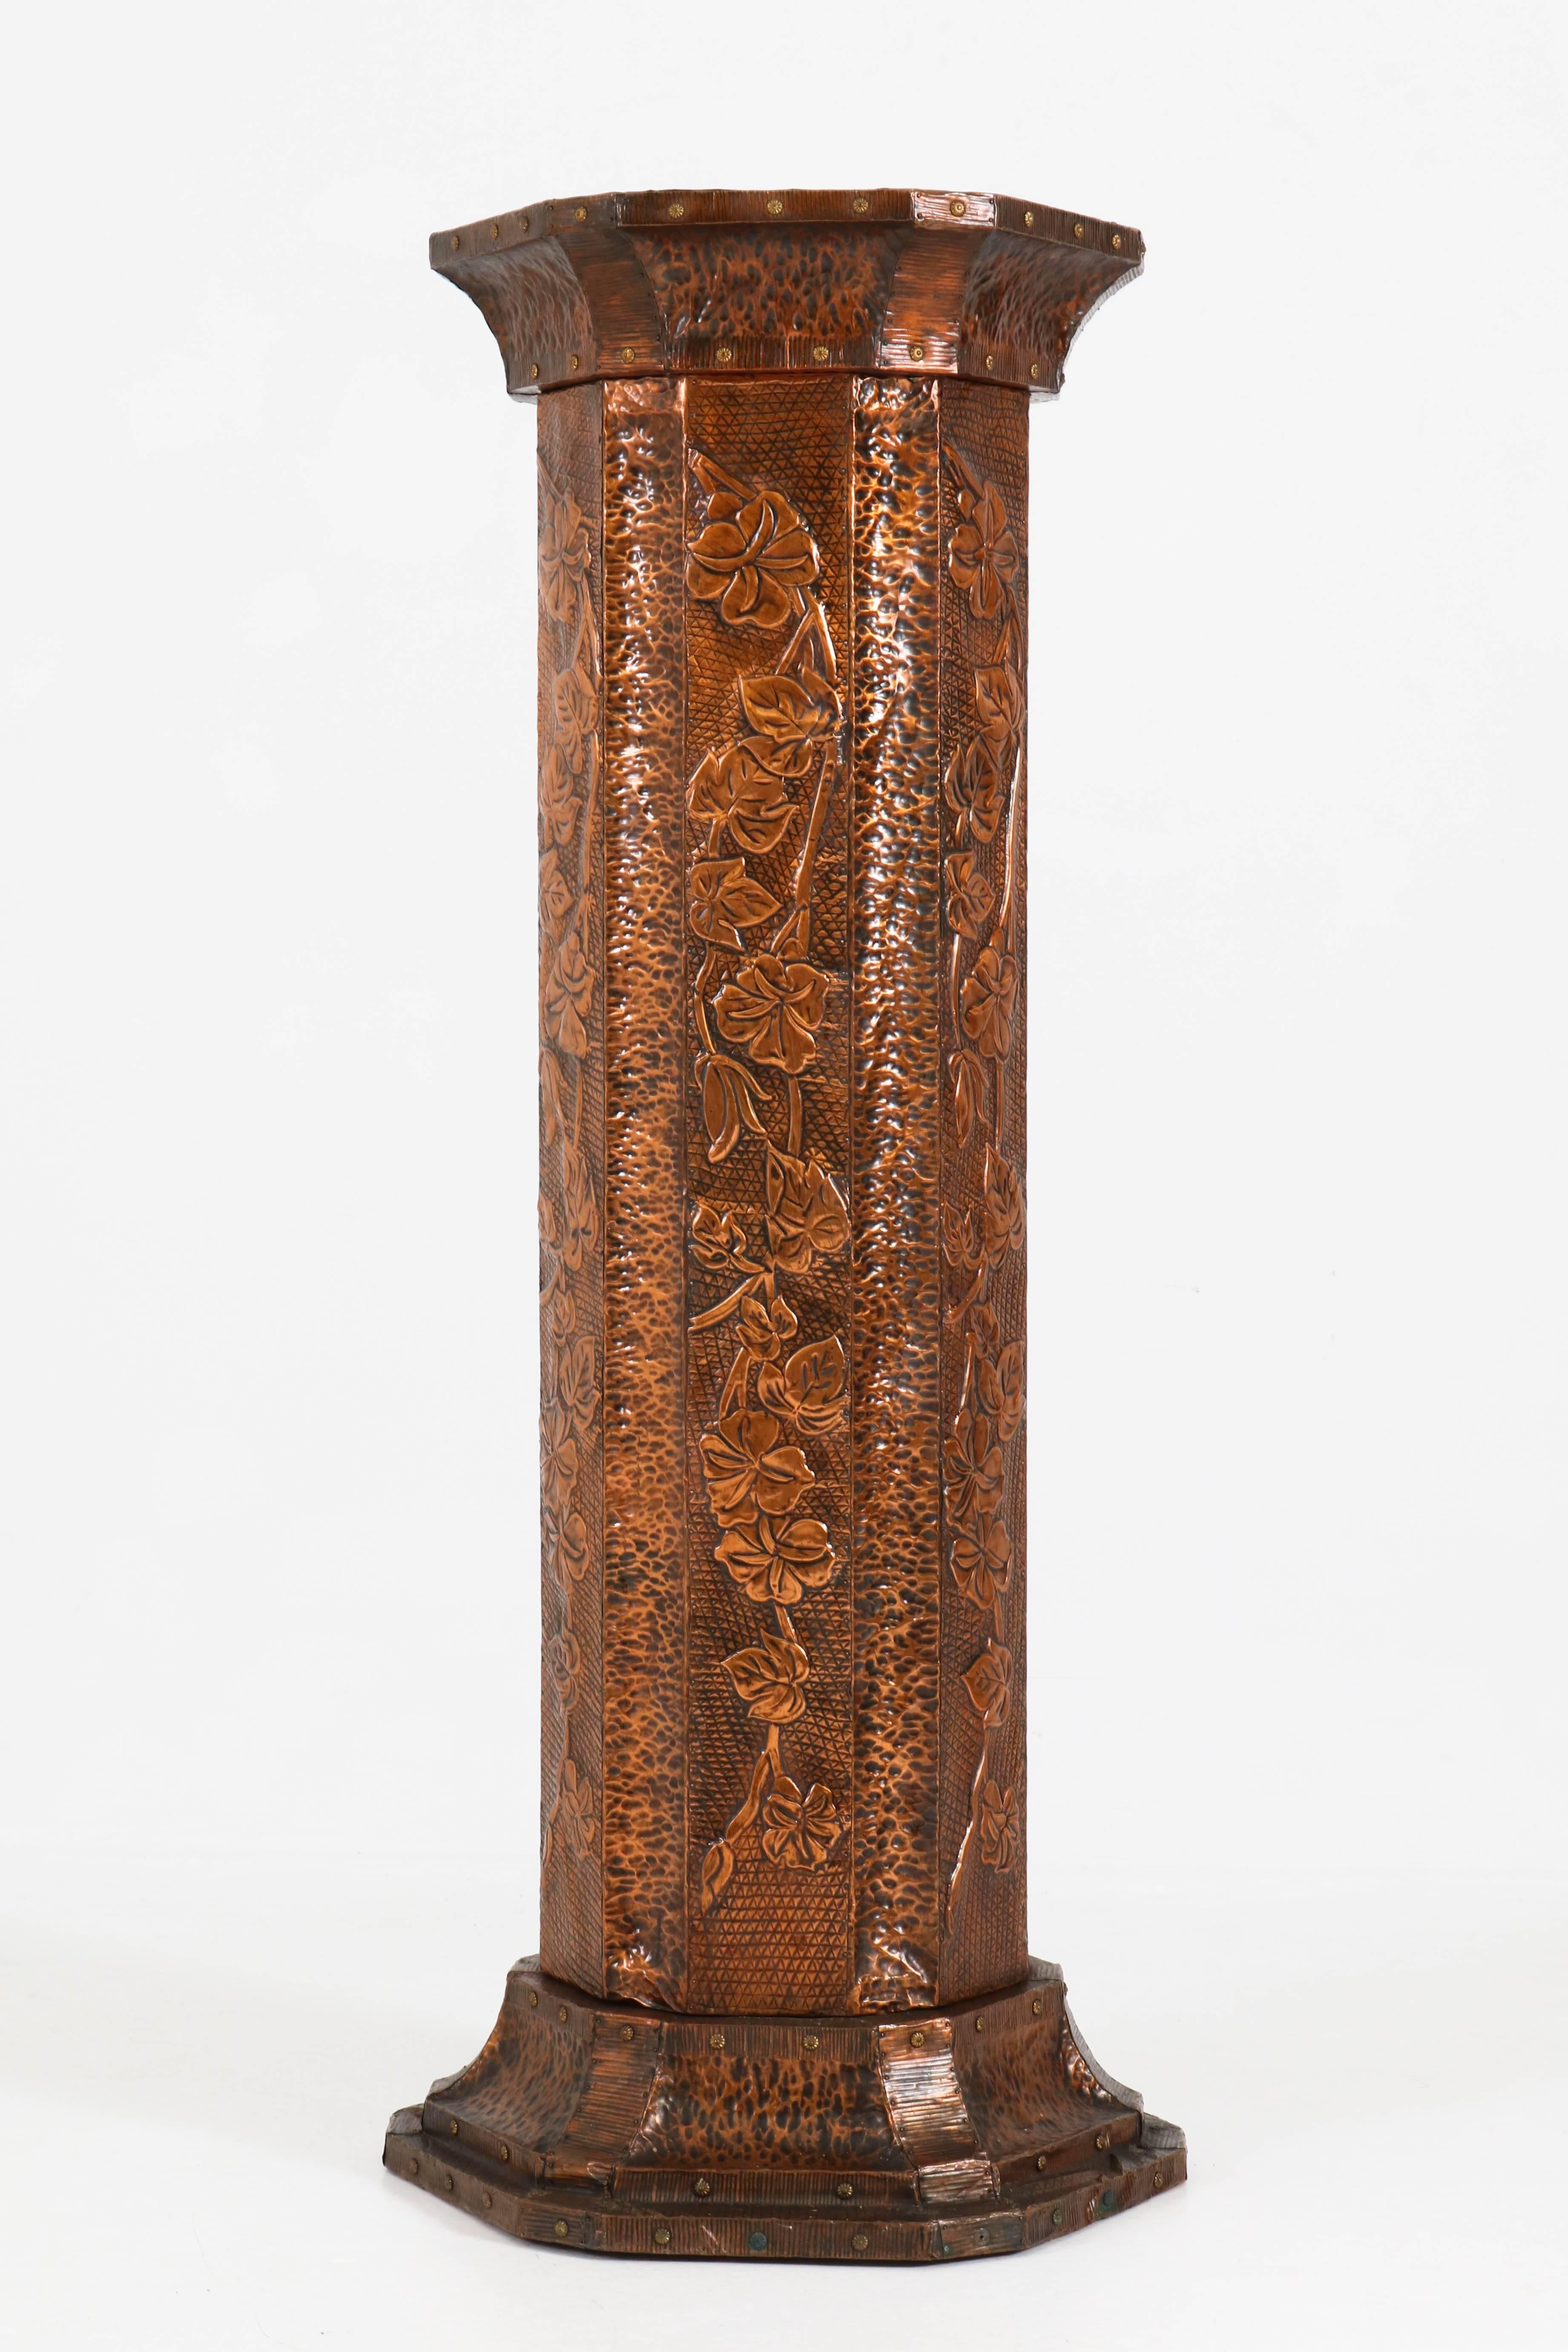 Striking French Art Deco pedestal, 1930s.
Wooden base with hammered copper flowers.
In good original condition with minor wear consistent with age and use,
preserving a beautiful patina.